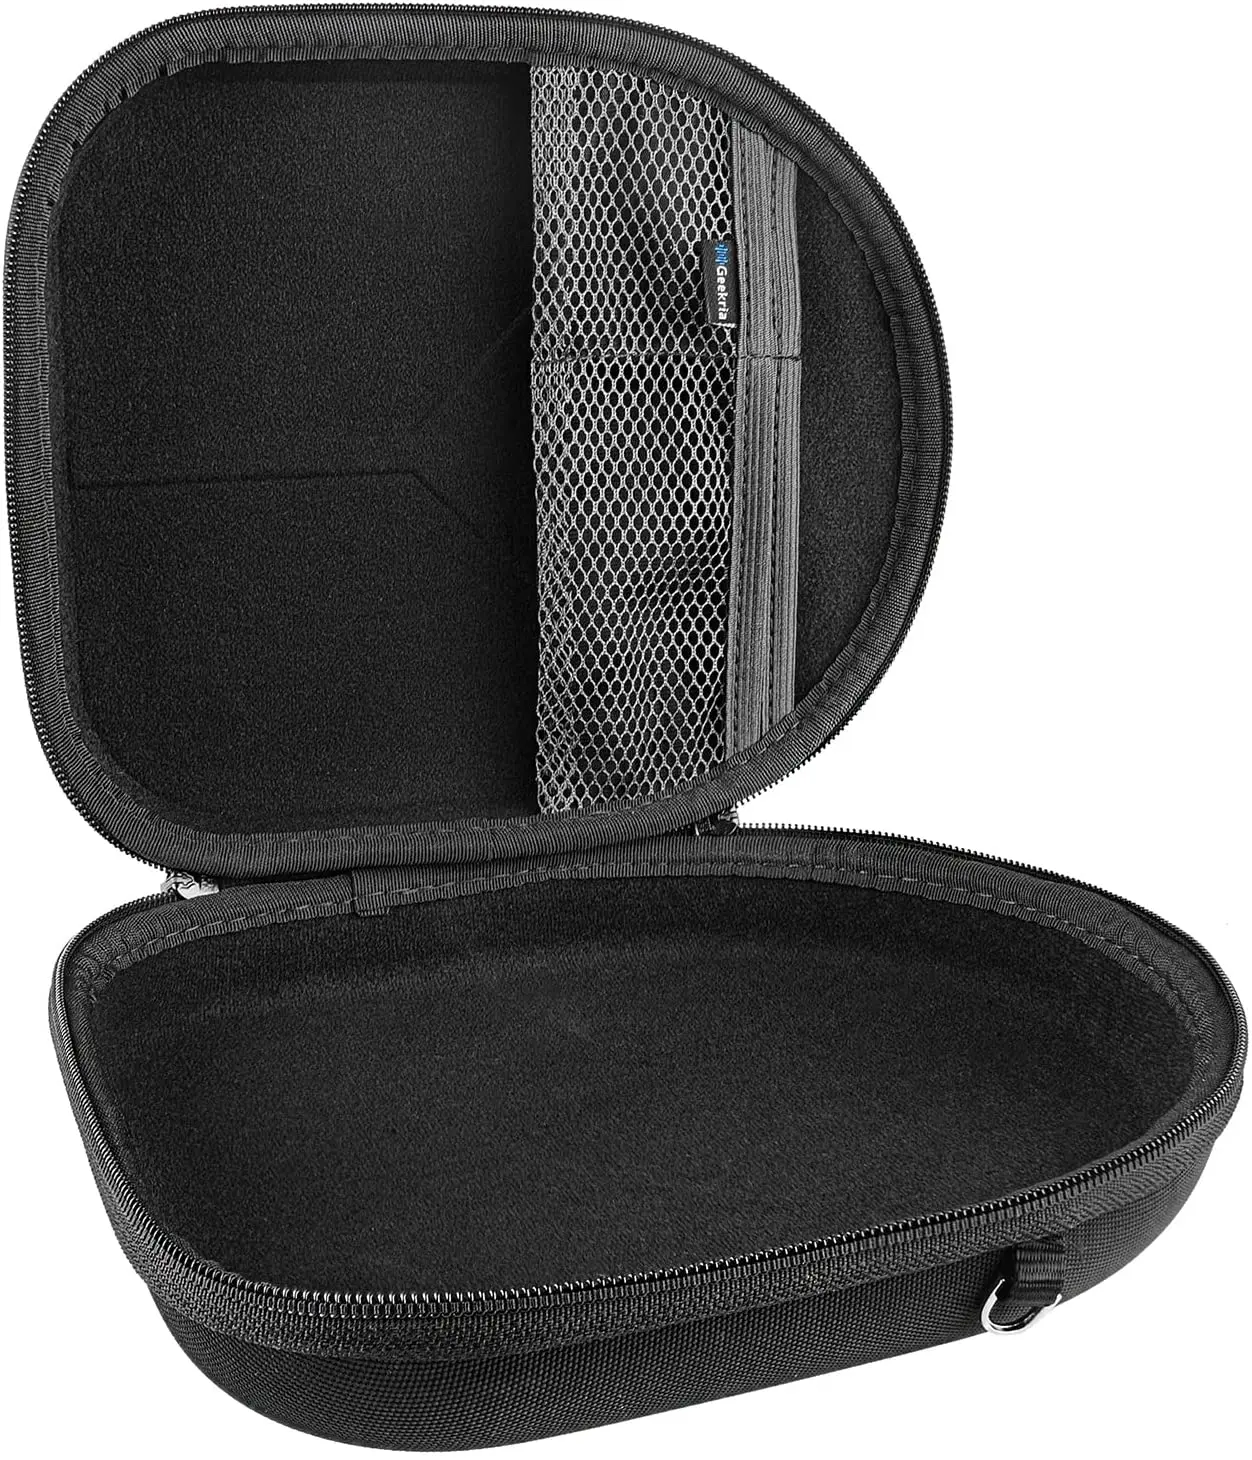 Geekria Headphones Case For Parrot Zik, Bose QC35 ii, B&O Play  Portable Bluetooth Earphones Headset Bag for Accessories Storage enlarge